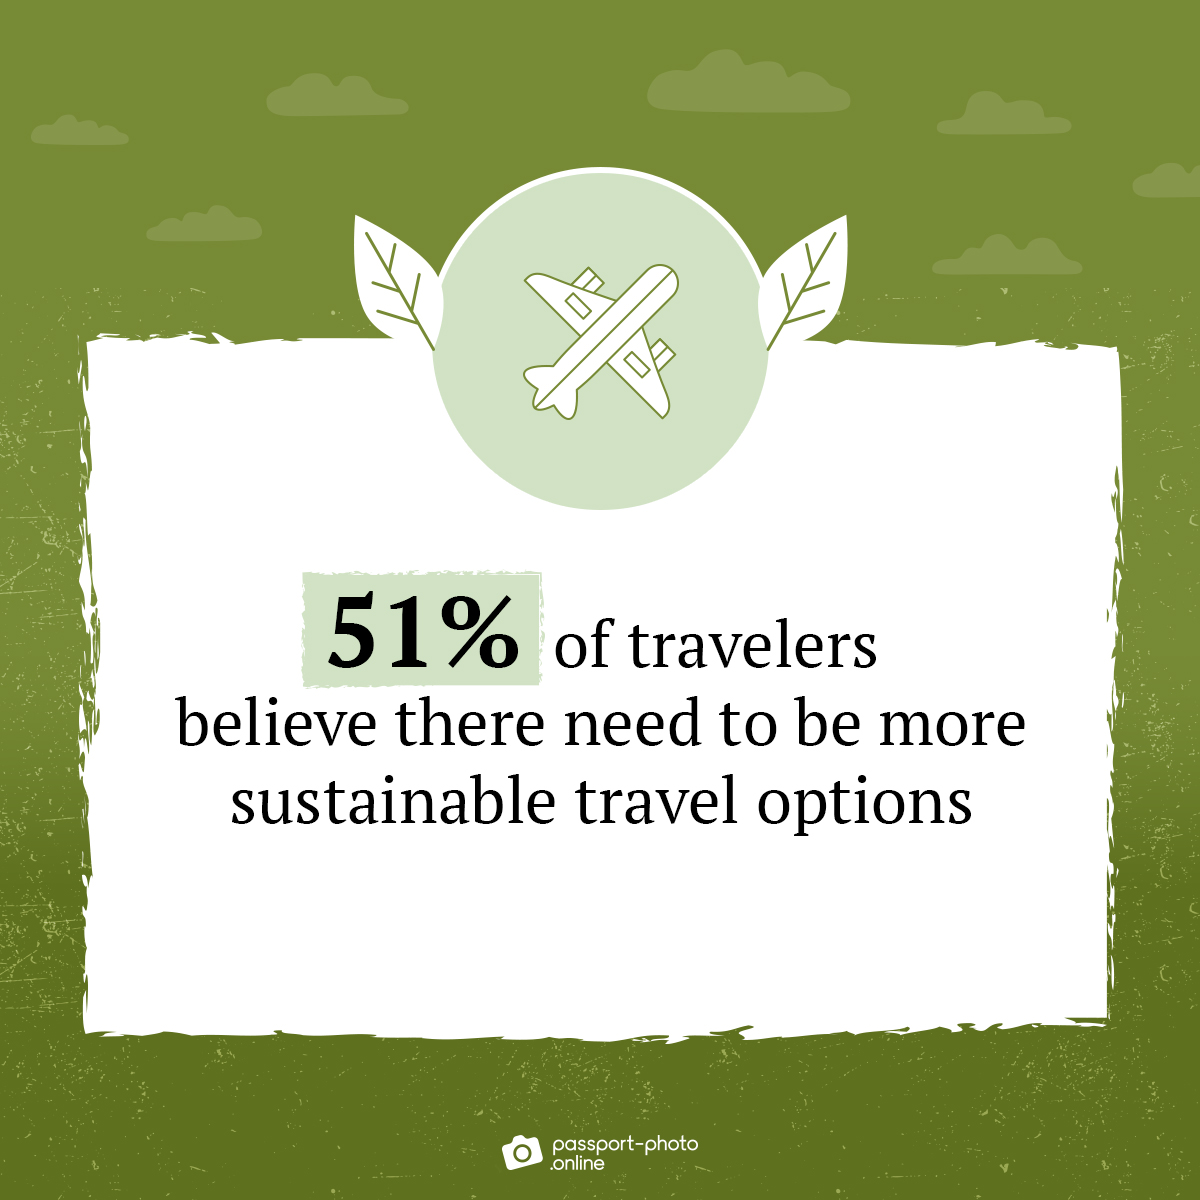 51% of travelers want more sustainable travel options